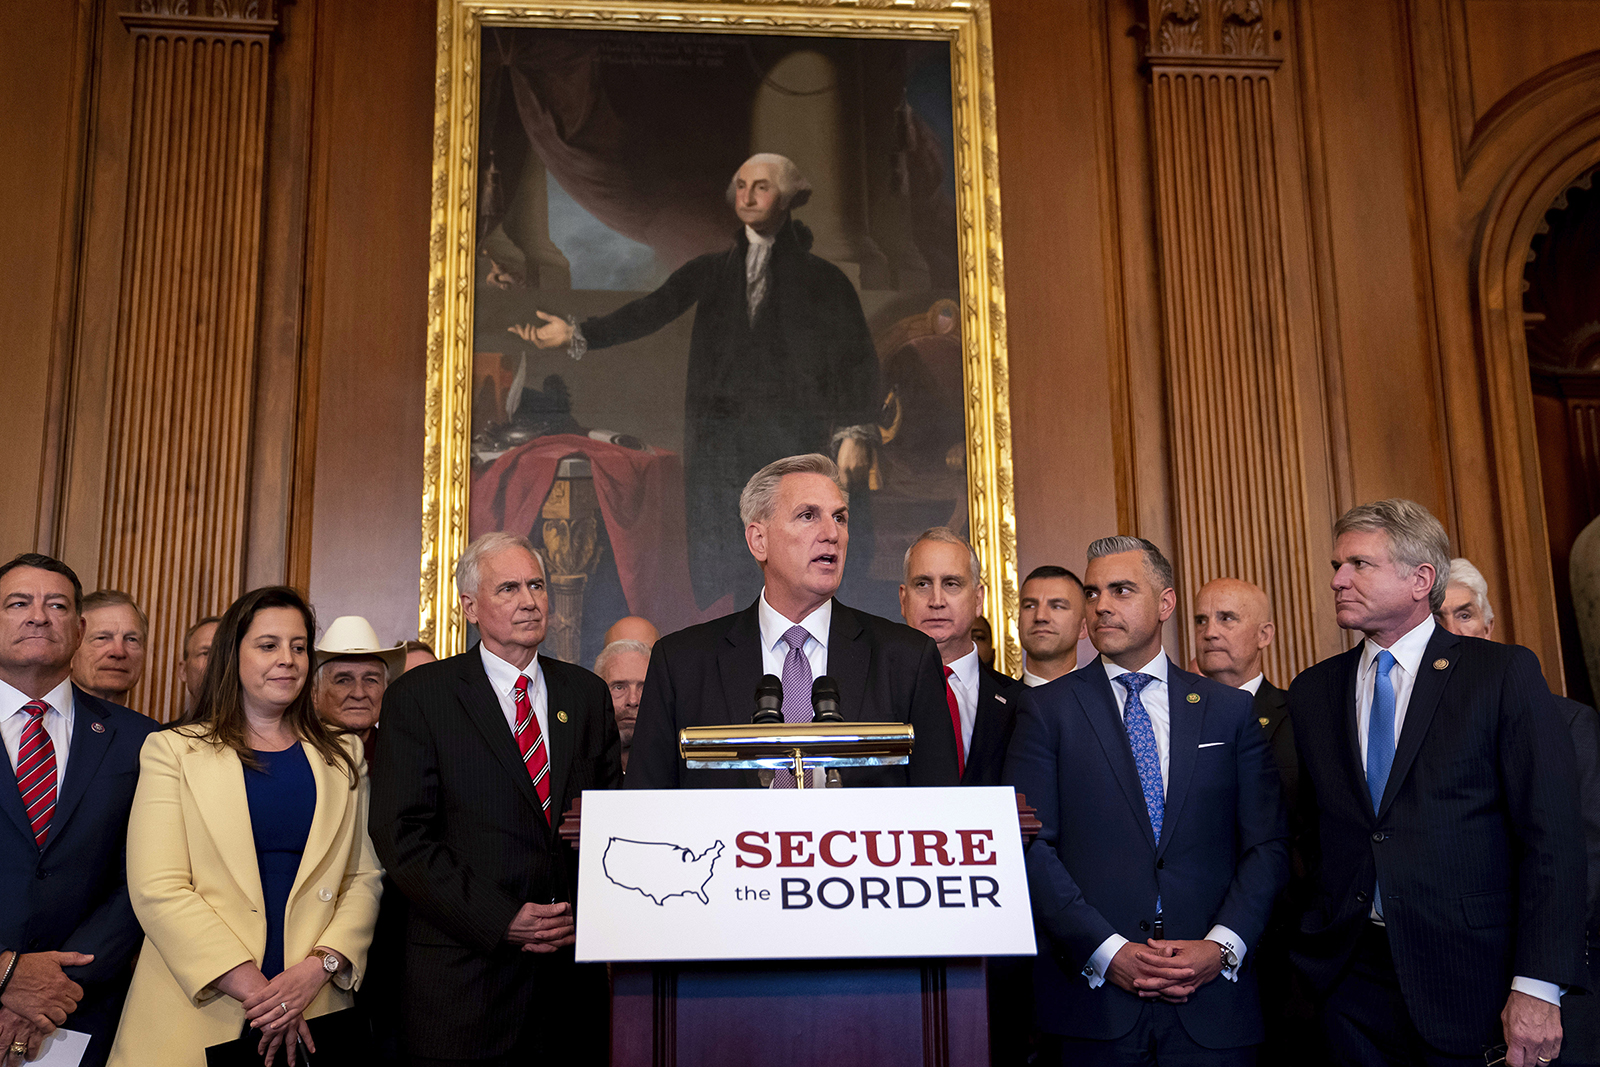 House Speaker Kevin McCarthy, of Calif., center, speaks during a news conference following a vote on H.R. 2, a bill to build more U.S.-Mexico border wall and impose new restrictions on asylum seekers, in the Rayburn Room at the Capitol Building in Washington, Thursday, May 11, 2023. Democrats, who have a narrow hold on the Senate, have decried the aggressive measures in the bill as “cruel” and “anti-immigrant," and President Joe Biden has already promised he would veto it. (AP Photo/Nathan Howard)